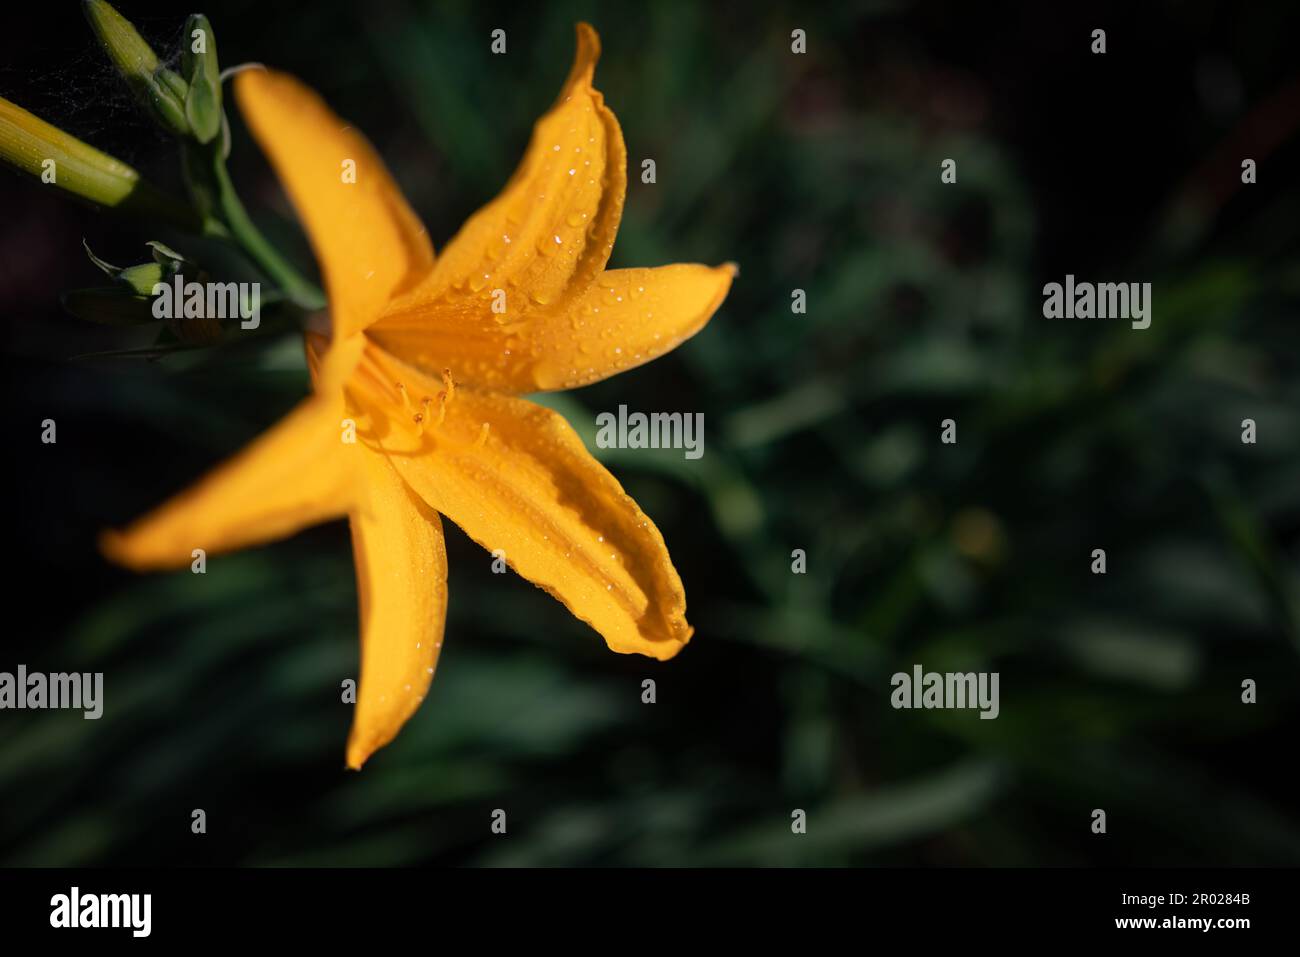 Yellow daylily with drops of water on its petals on green leaves background Stock Photo